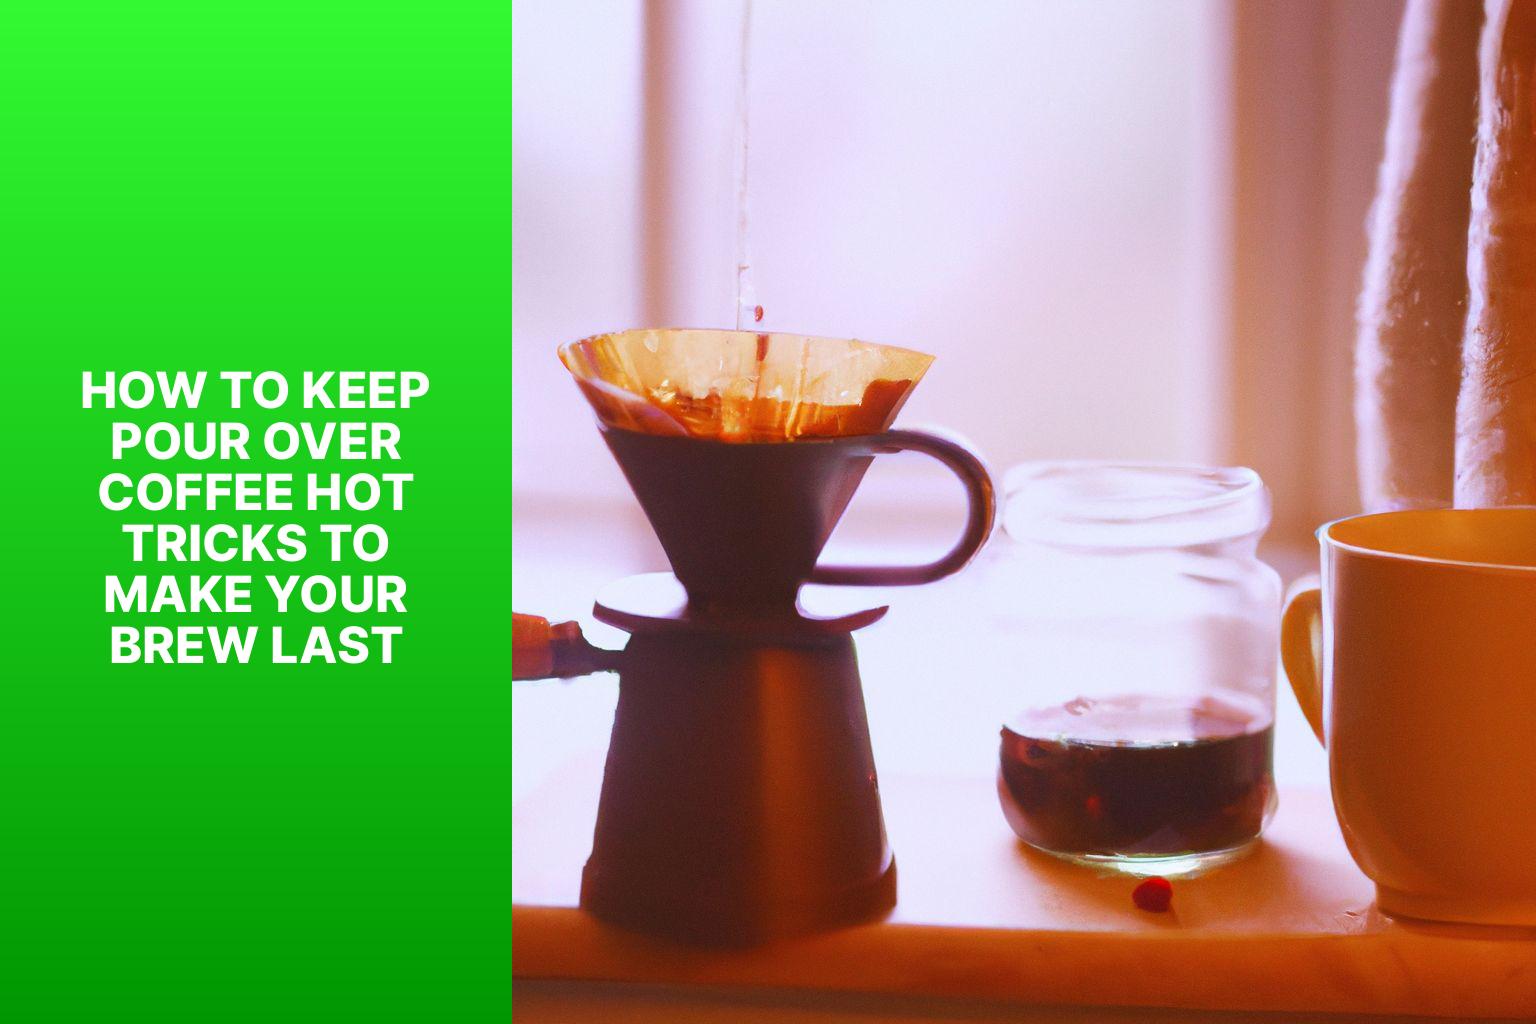 How to Keep Pour Over Coffee Hot: Tricks to Make Your Brew Last